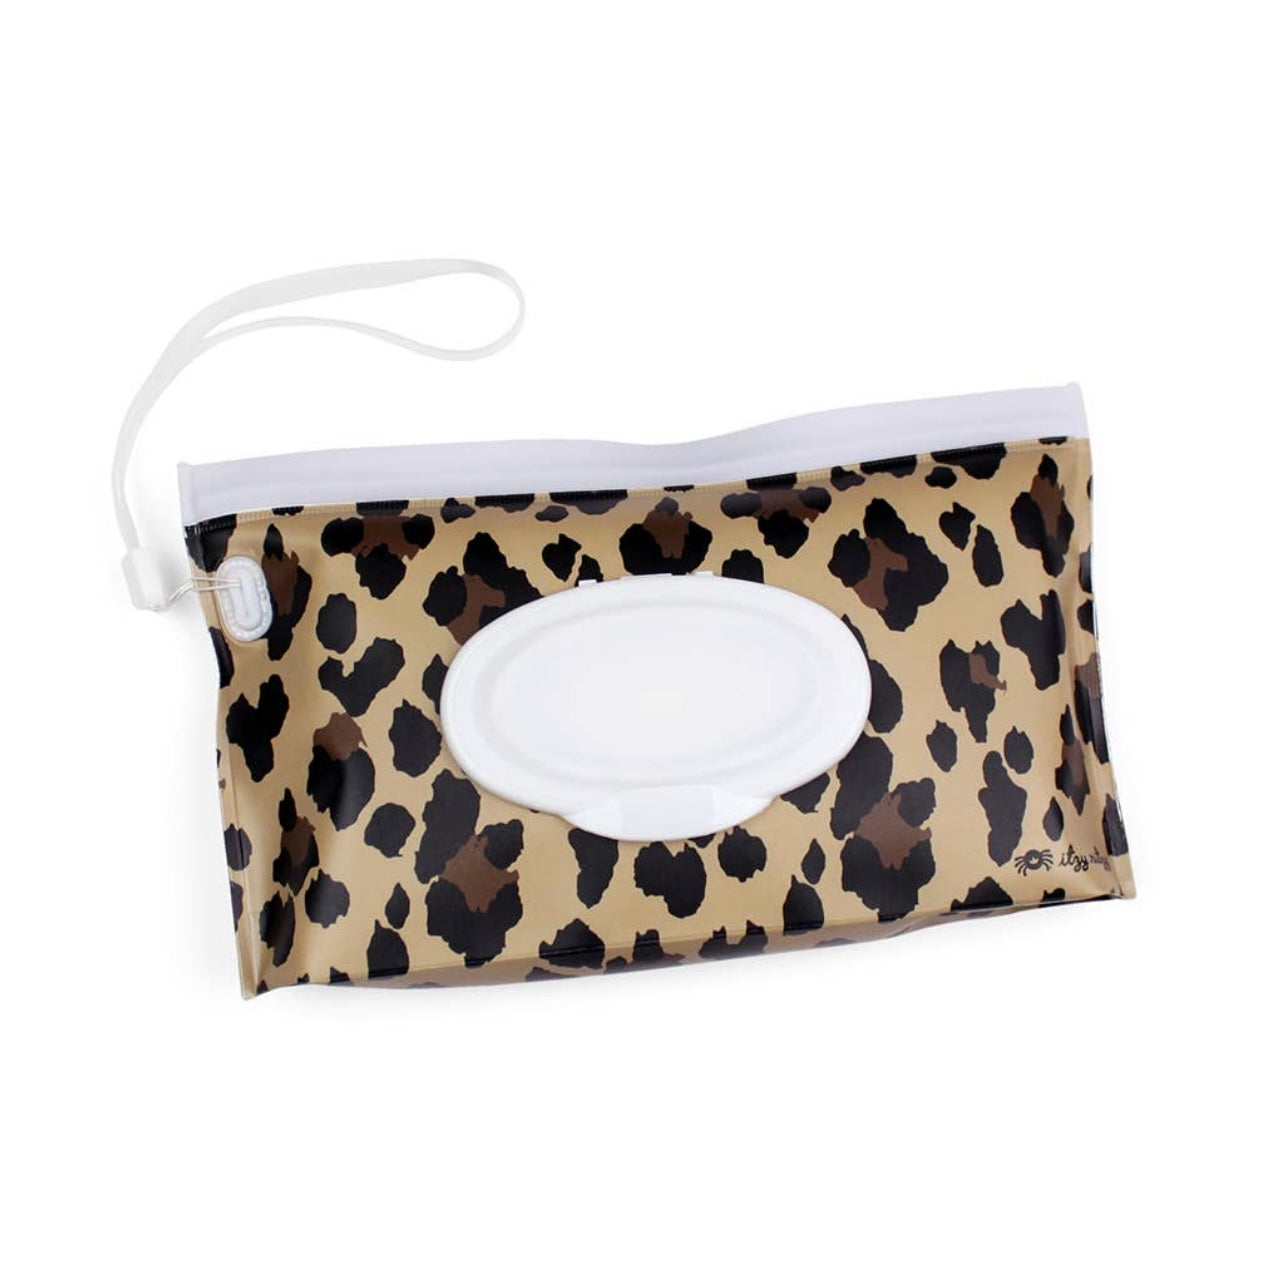 Take and Travel Pouch Reusable Wipes Case (3 colors)